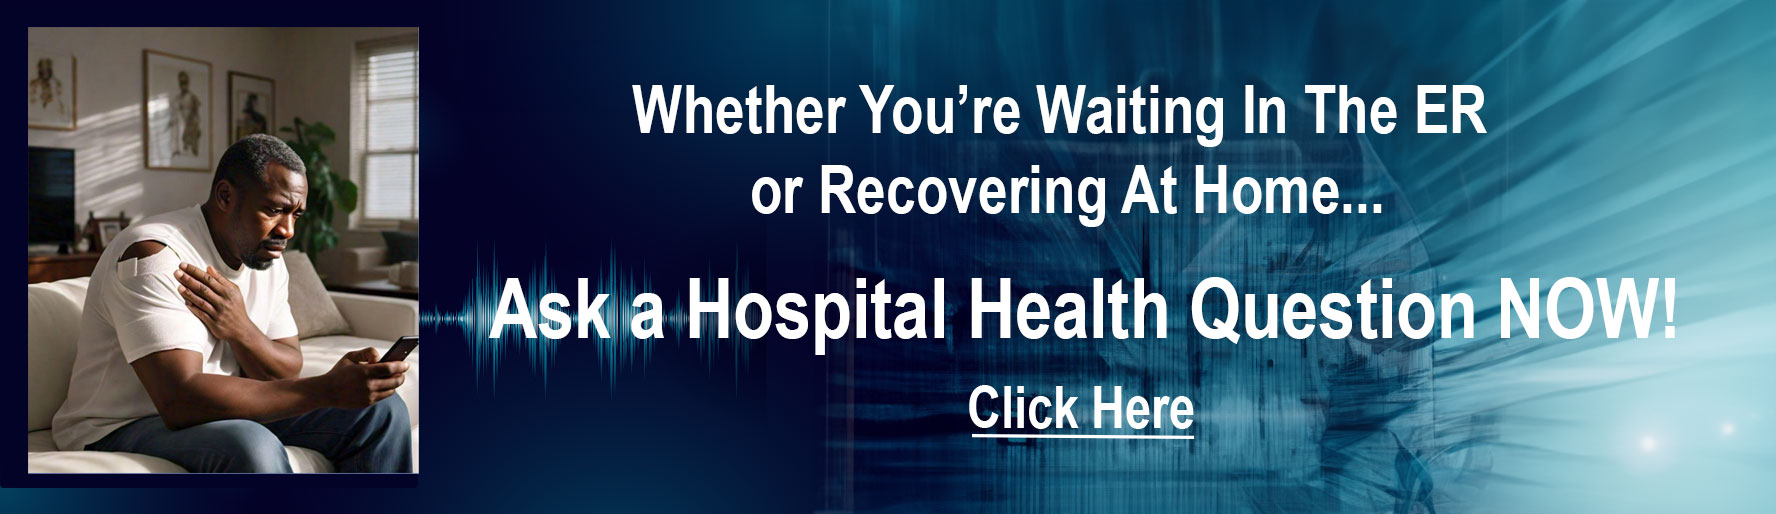 Whether you're waiting in the ER or Recovering at Home Ask a Hospital Health Questions Now!
Click Here on the ad